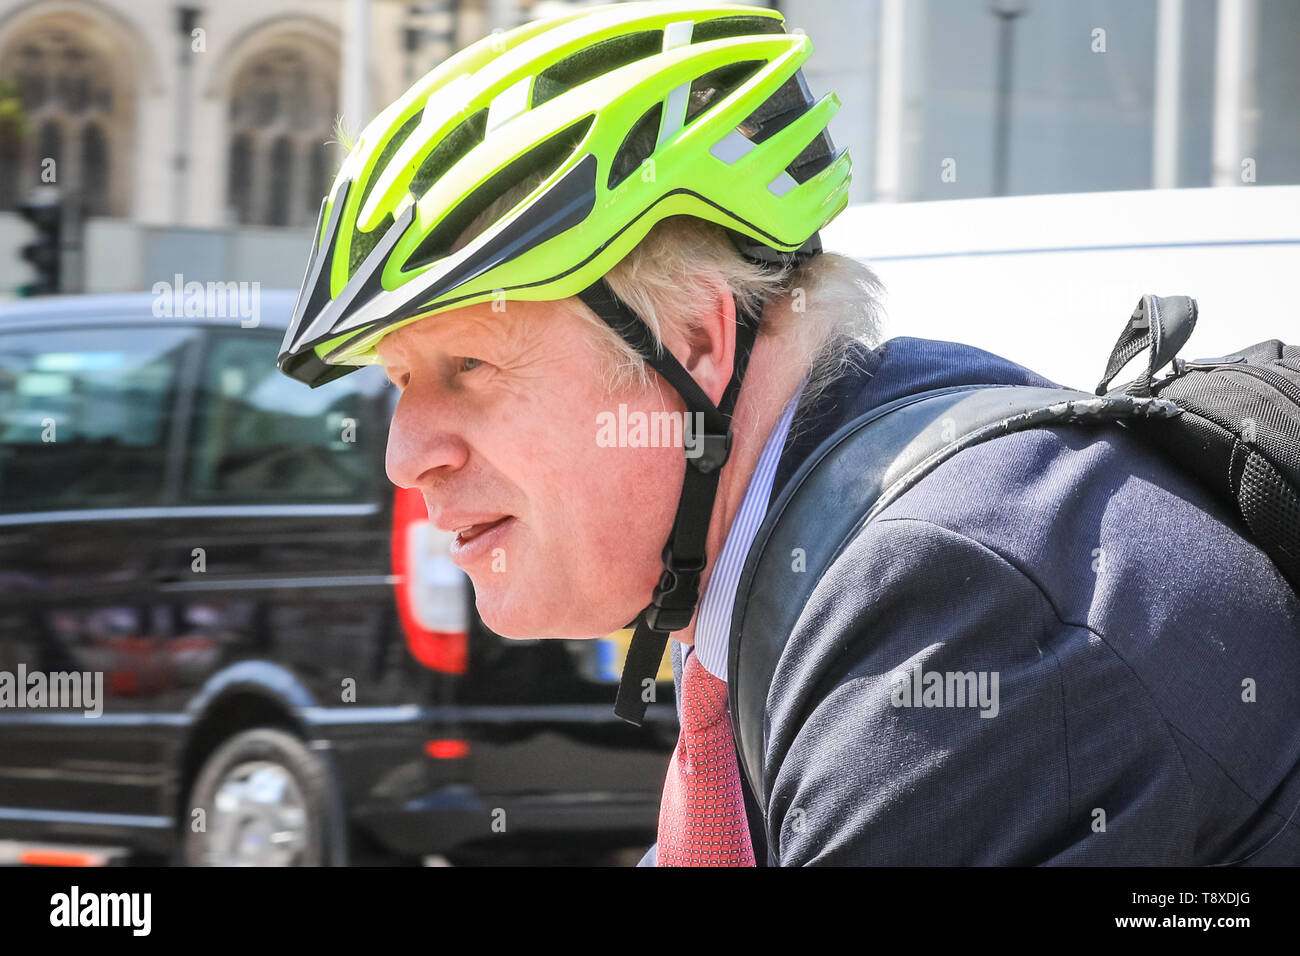 Westminster, London, UK. 15th May, 2019. Former Foreign Secretary and prominent Brexiteer Boris Johnson arrives at Parliament on his bicycle. Credit: Imageplotter/Alamy Live News Stock Photo